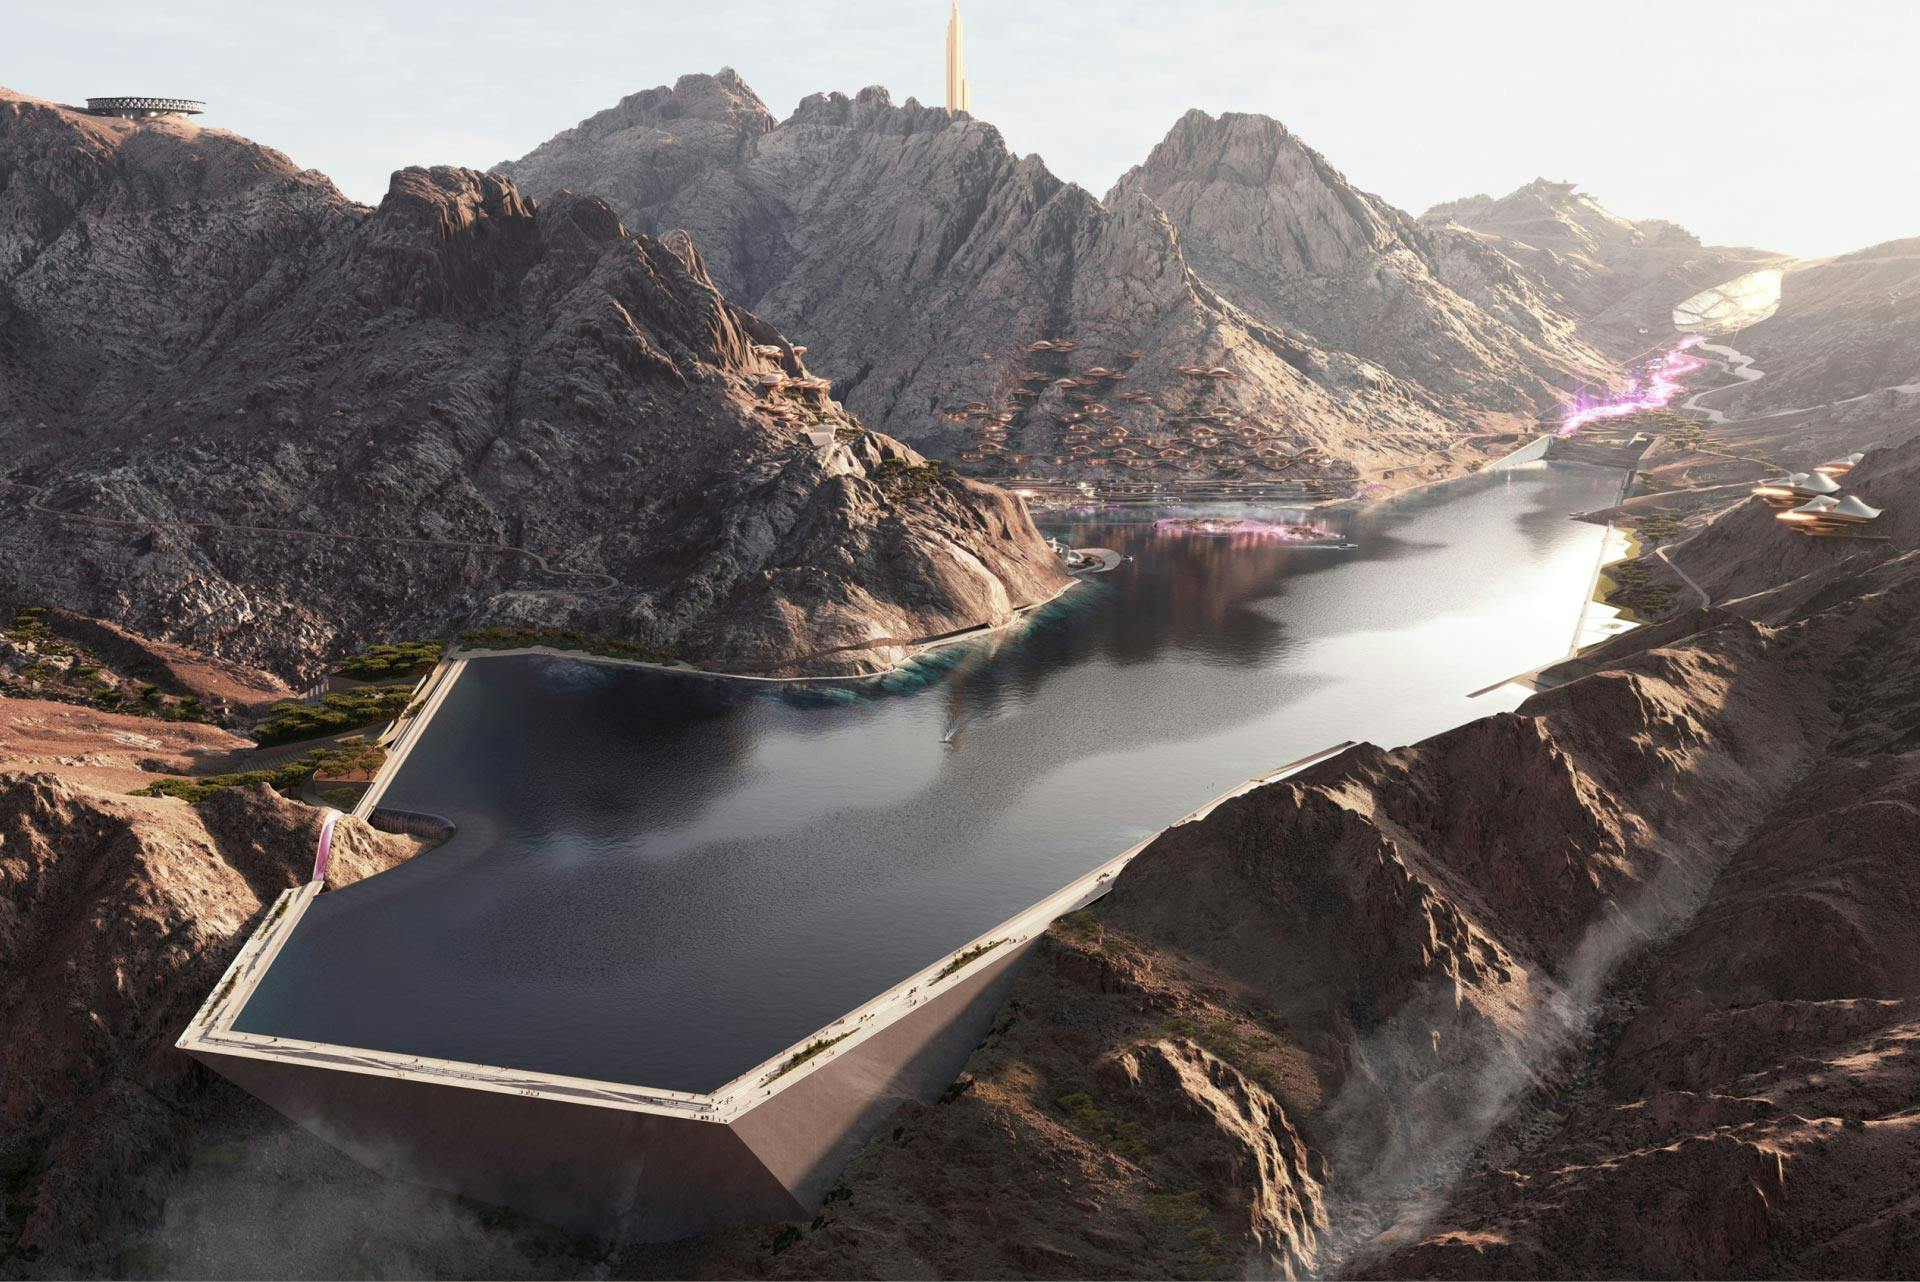 Man-made dam full of water surrounded by mountains.